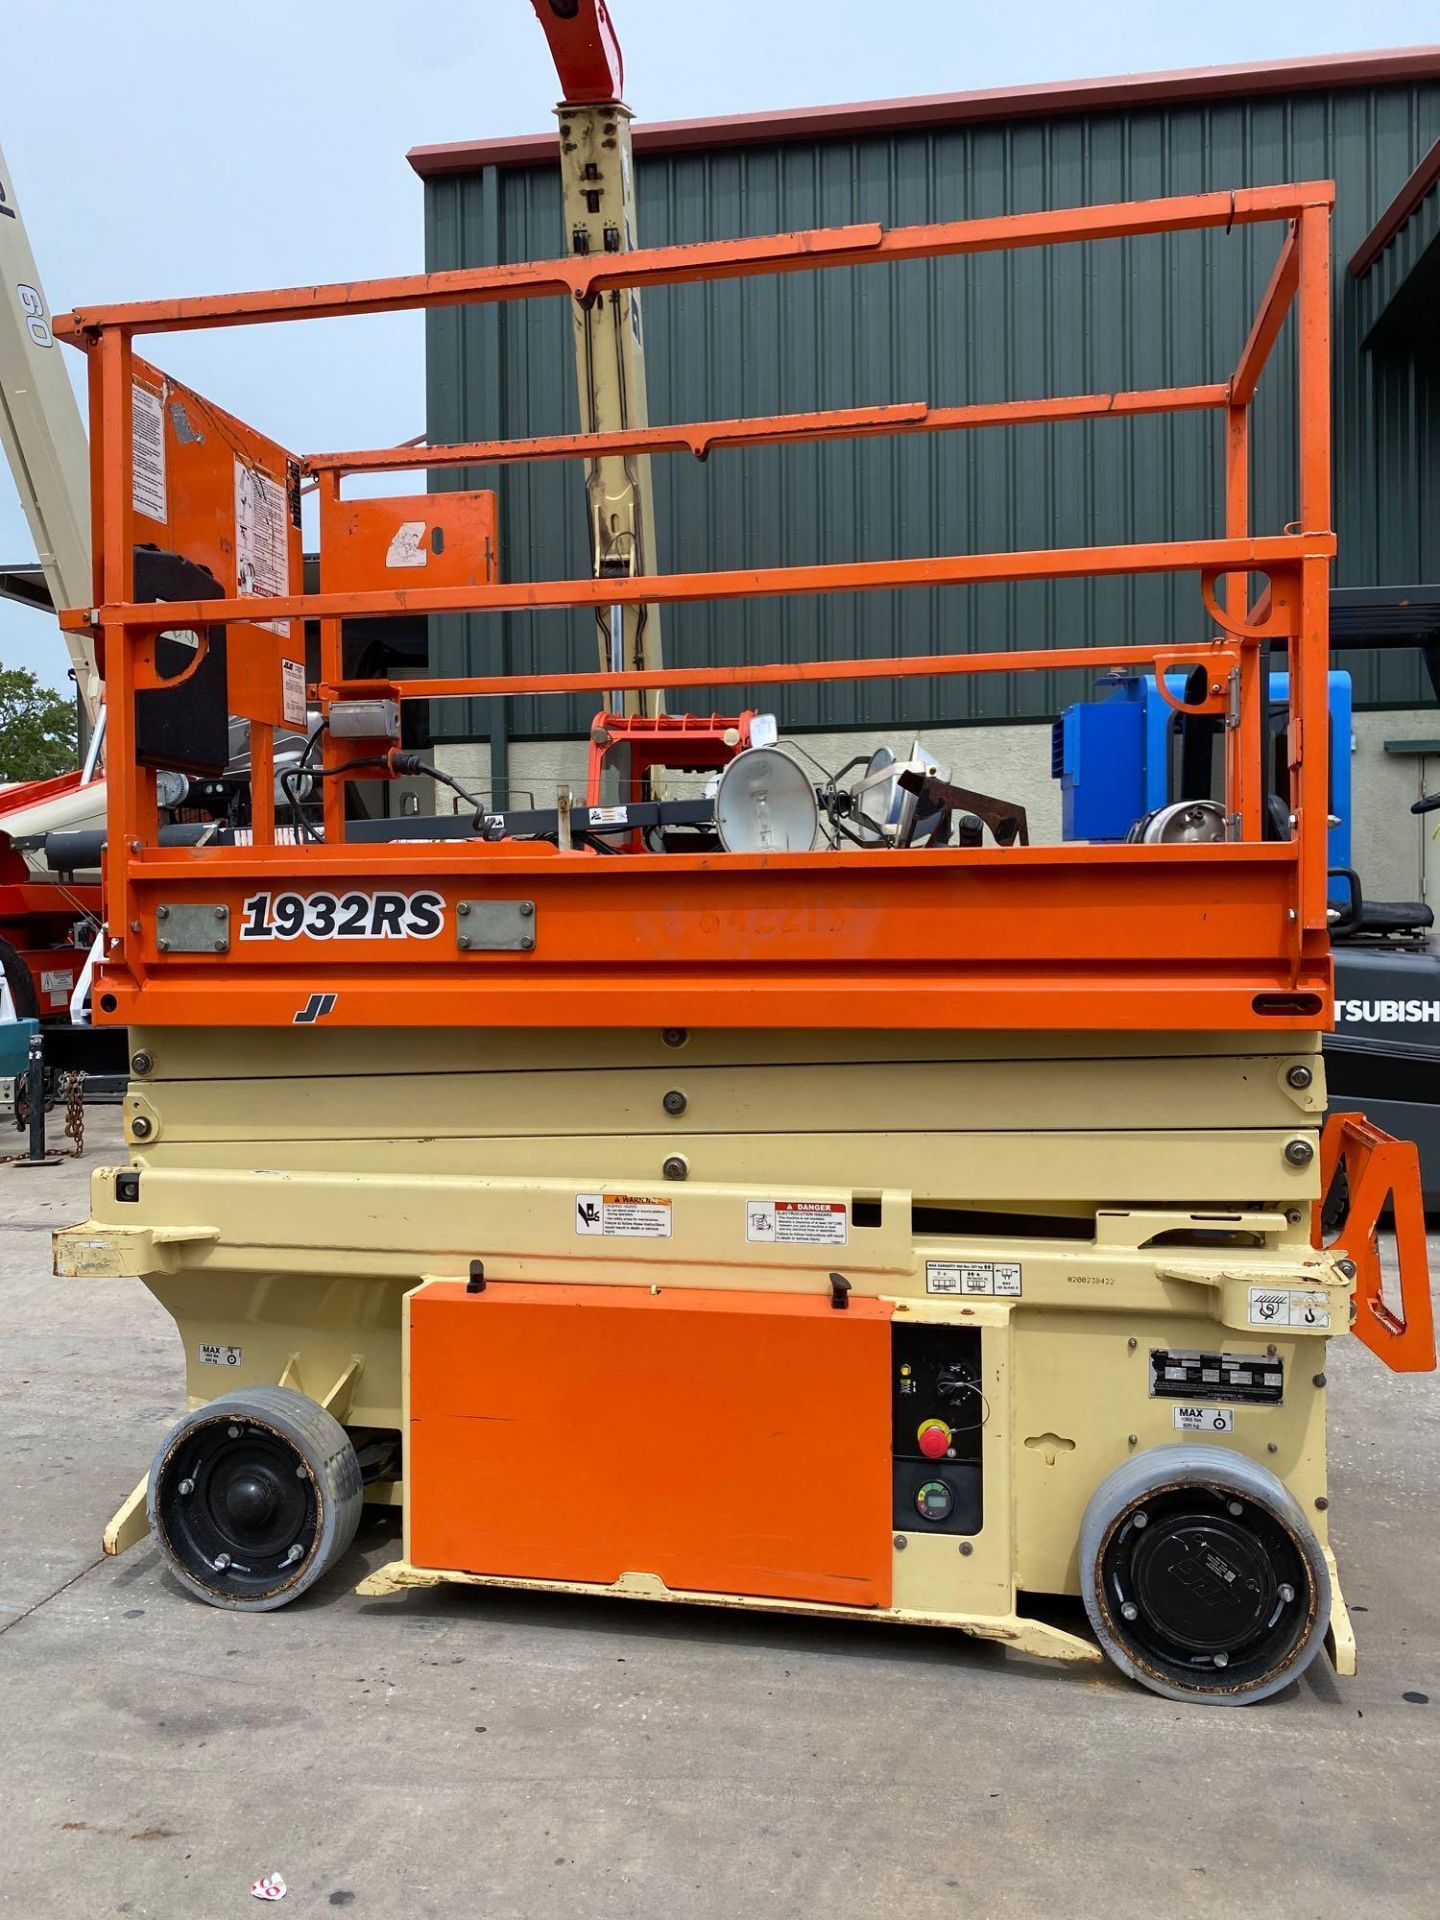 2015 JLG 1932RS ELECTRIC SCISSOR LIFT, SELF PROPELLED, 19' PLATFORM HEIGHTT, BUILT IN BATTERY CHARGE - Image 4 of 7